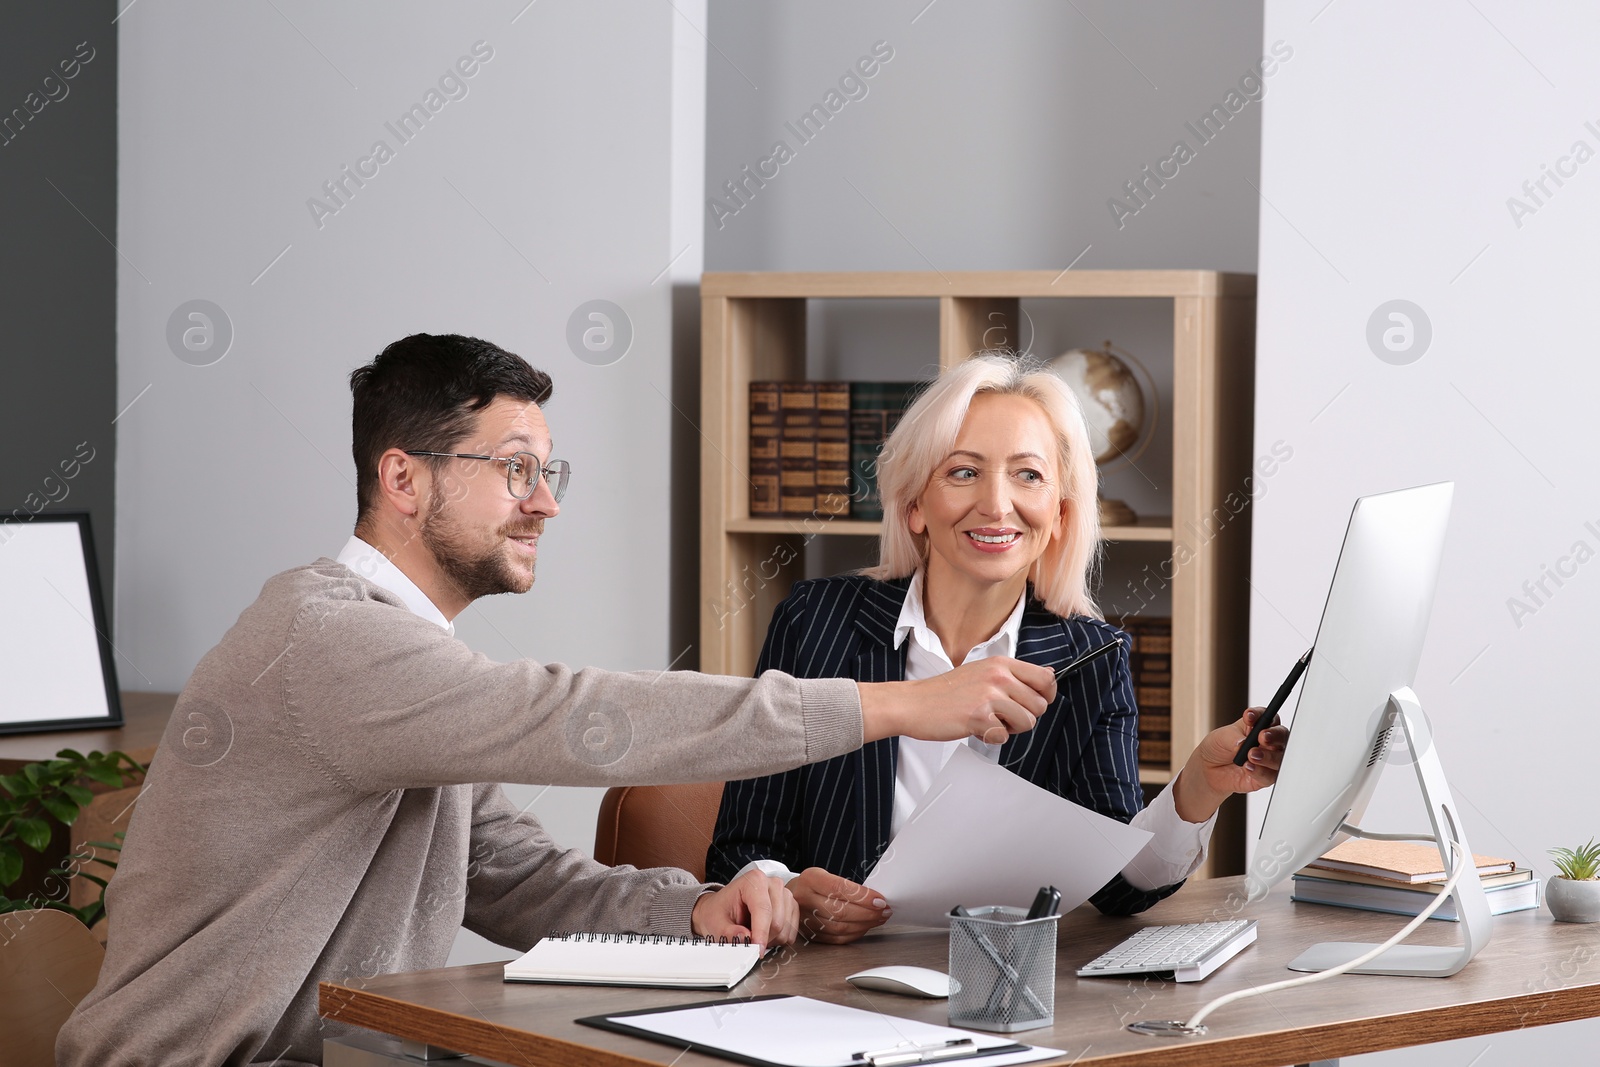 Photo of Boss and employee discussing work issues at wooden table in office